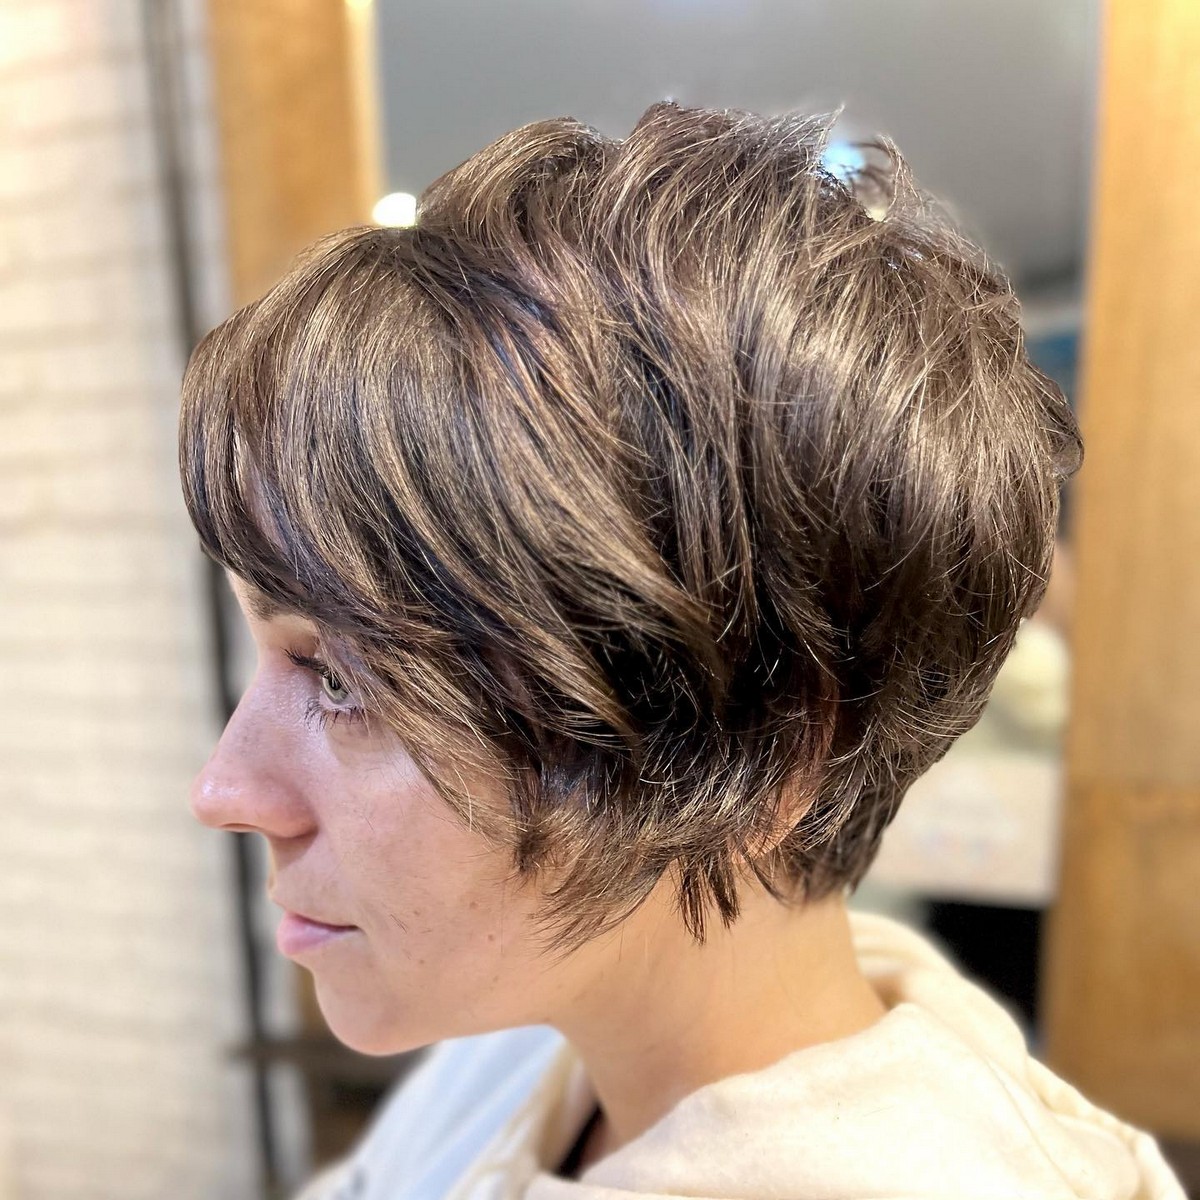 Pixie Textured Cut With Side Swept Bangs